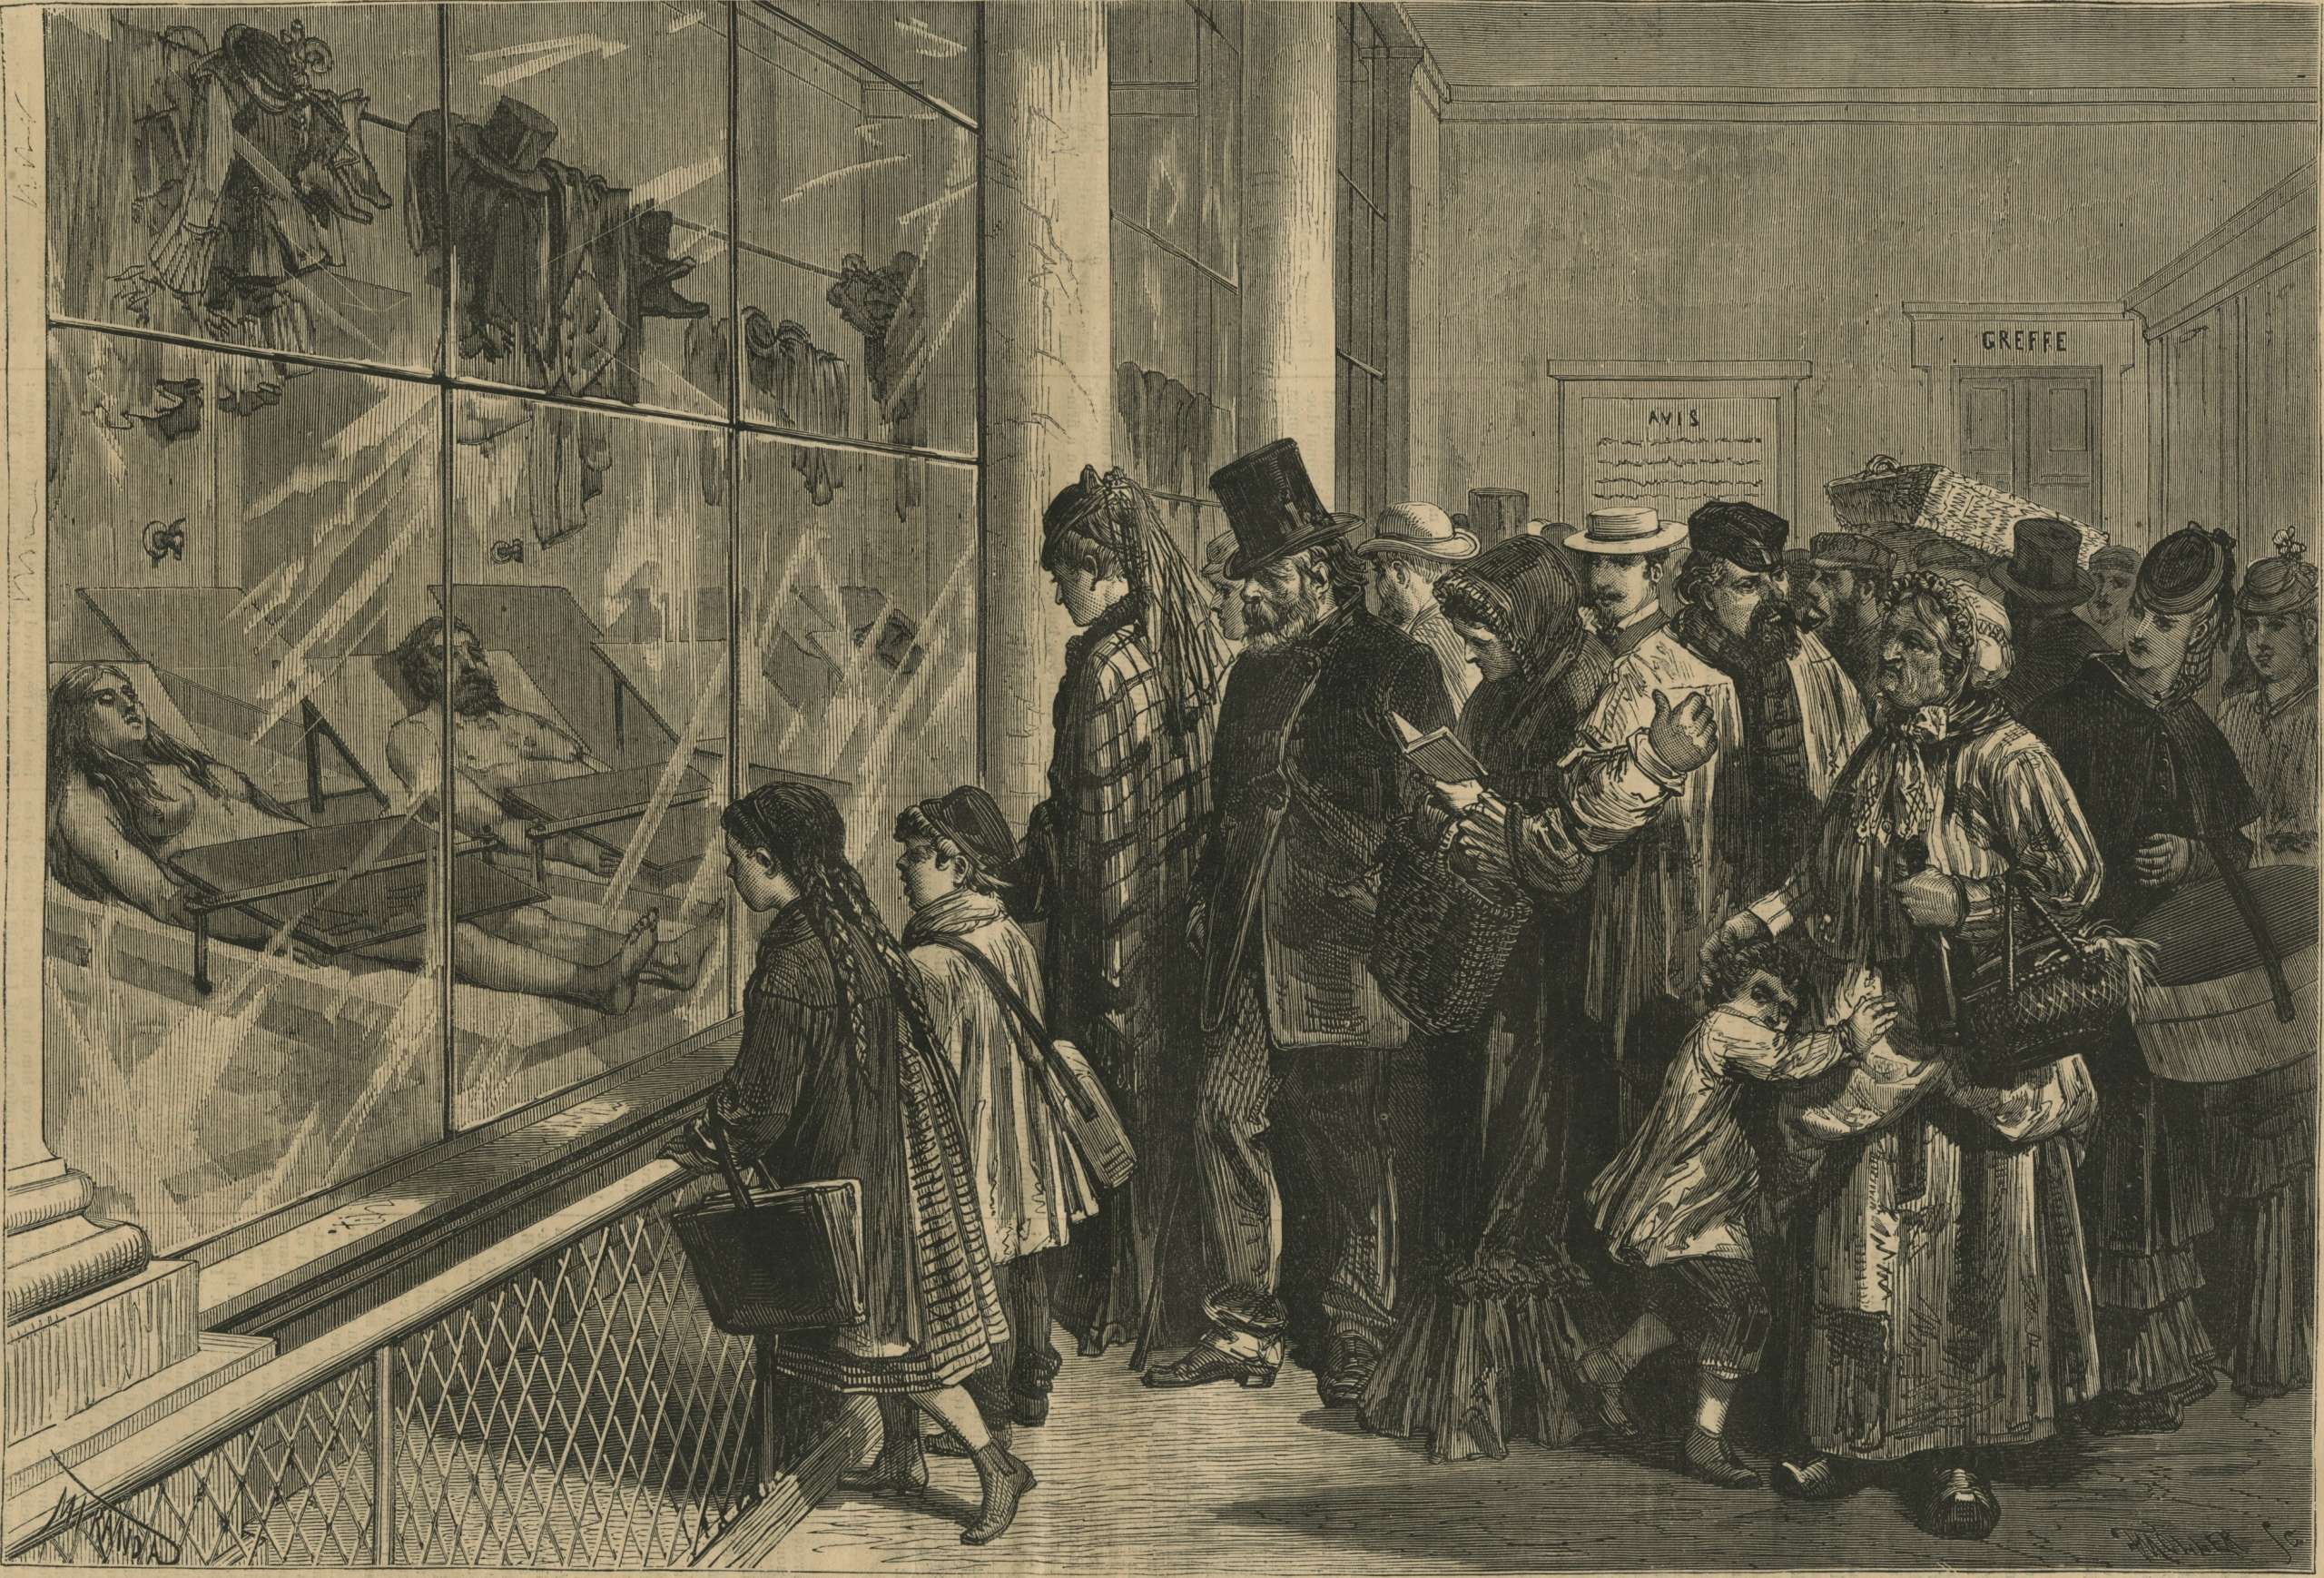 The morgue at Paris - The last scene of a tragedy. Harper's Weekly: July 18, 1874